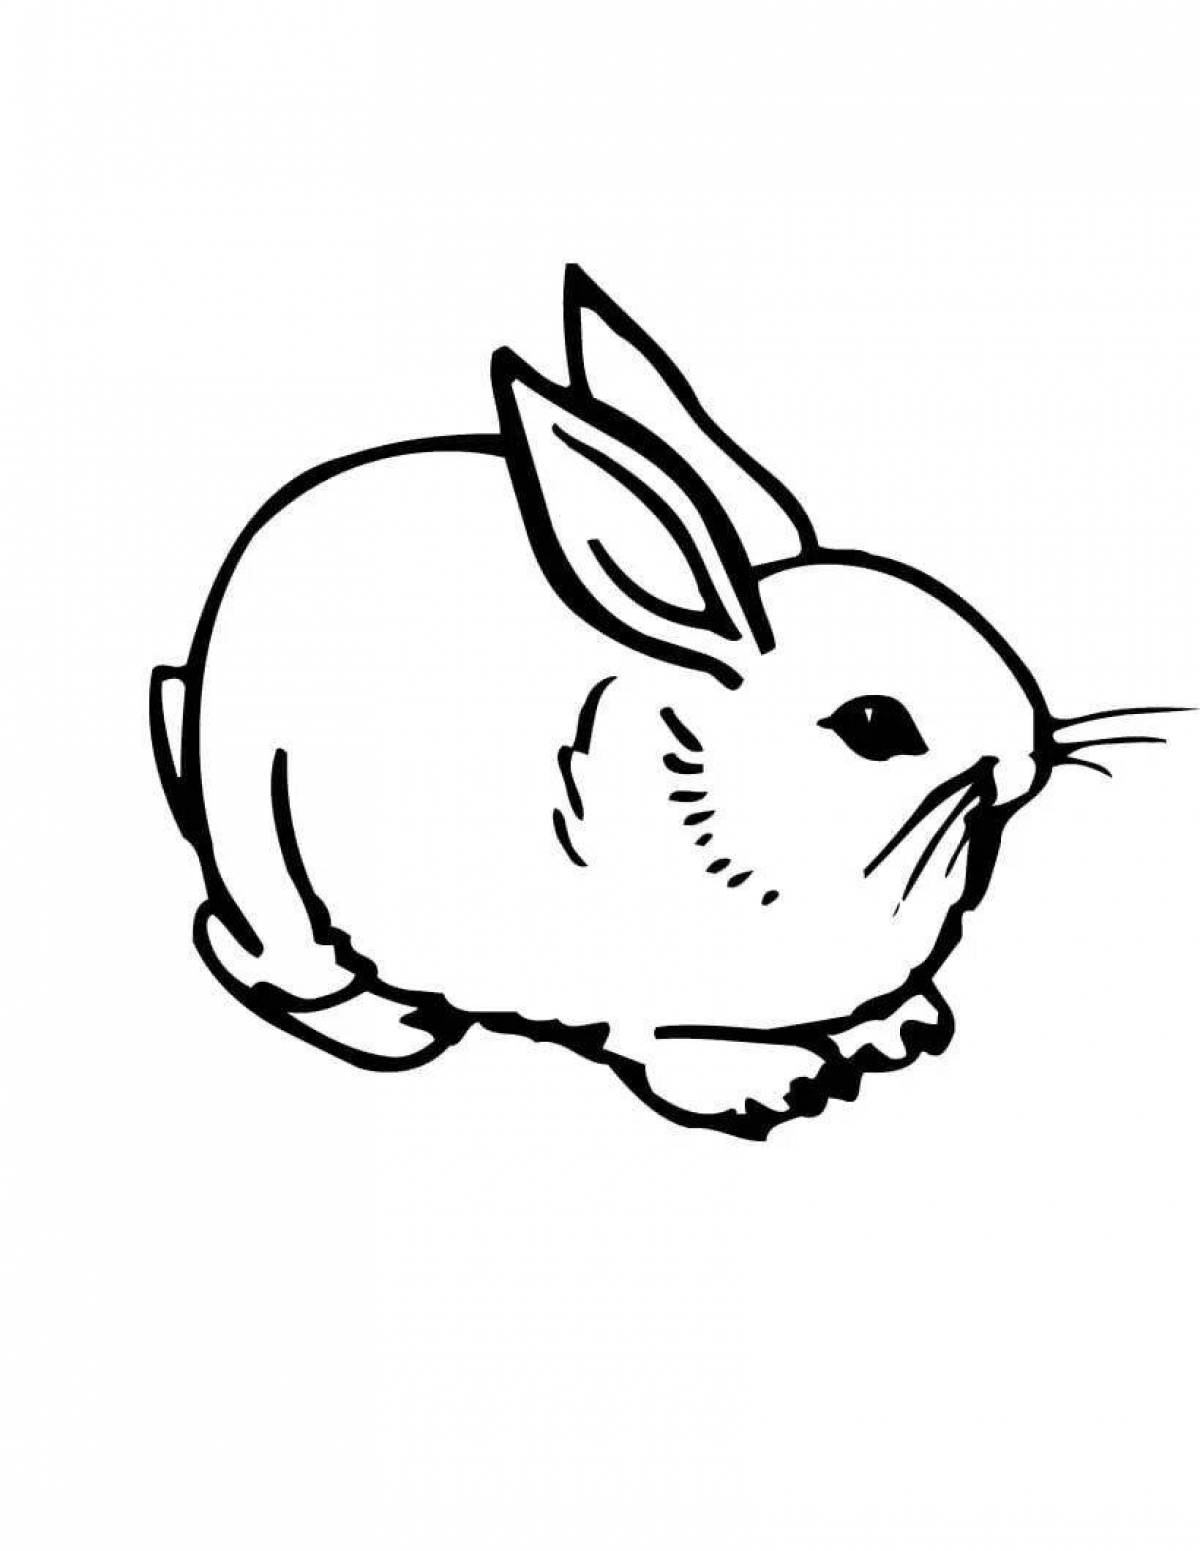 Playful rabbit coloring book for kids